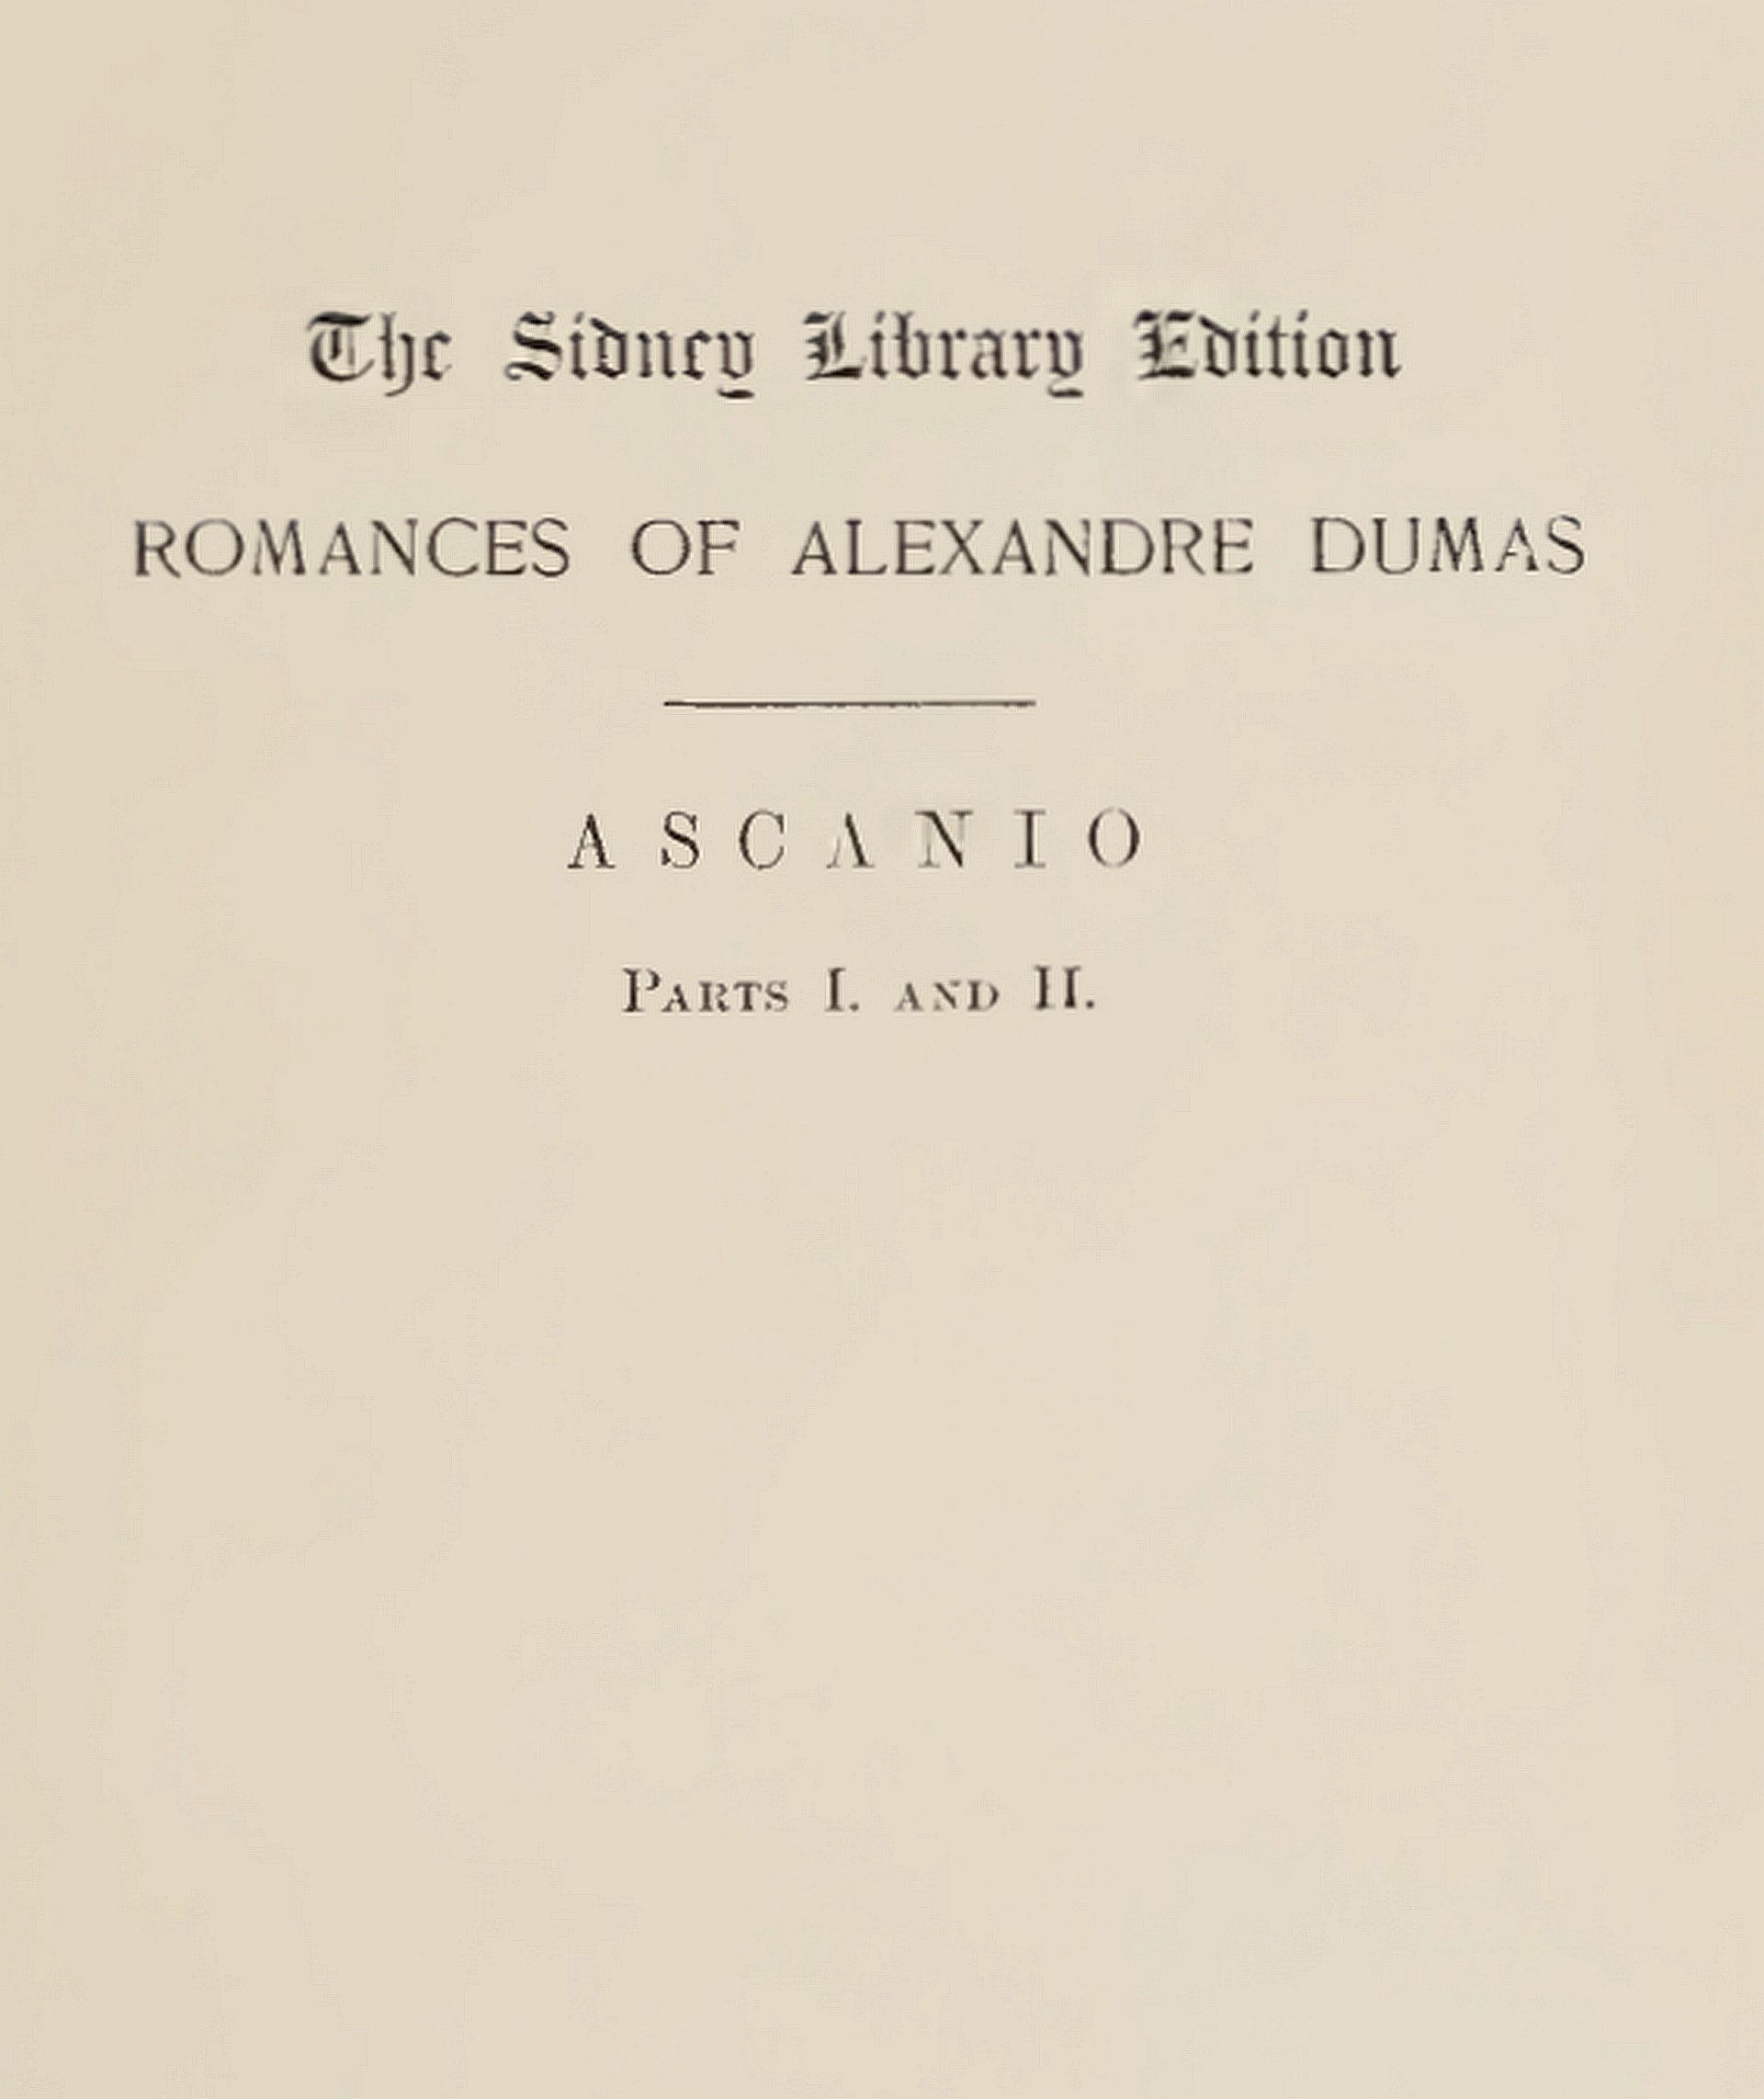 The Project Gutenberg eBook of Ascanio, by Alexandre Dumas.